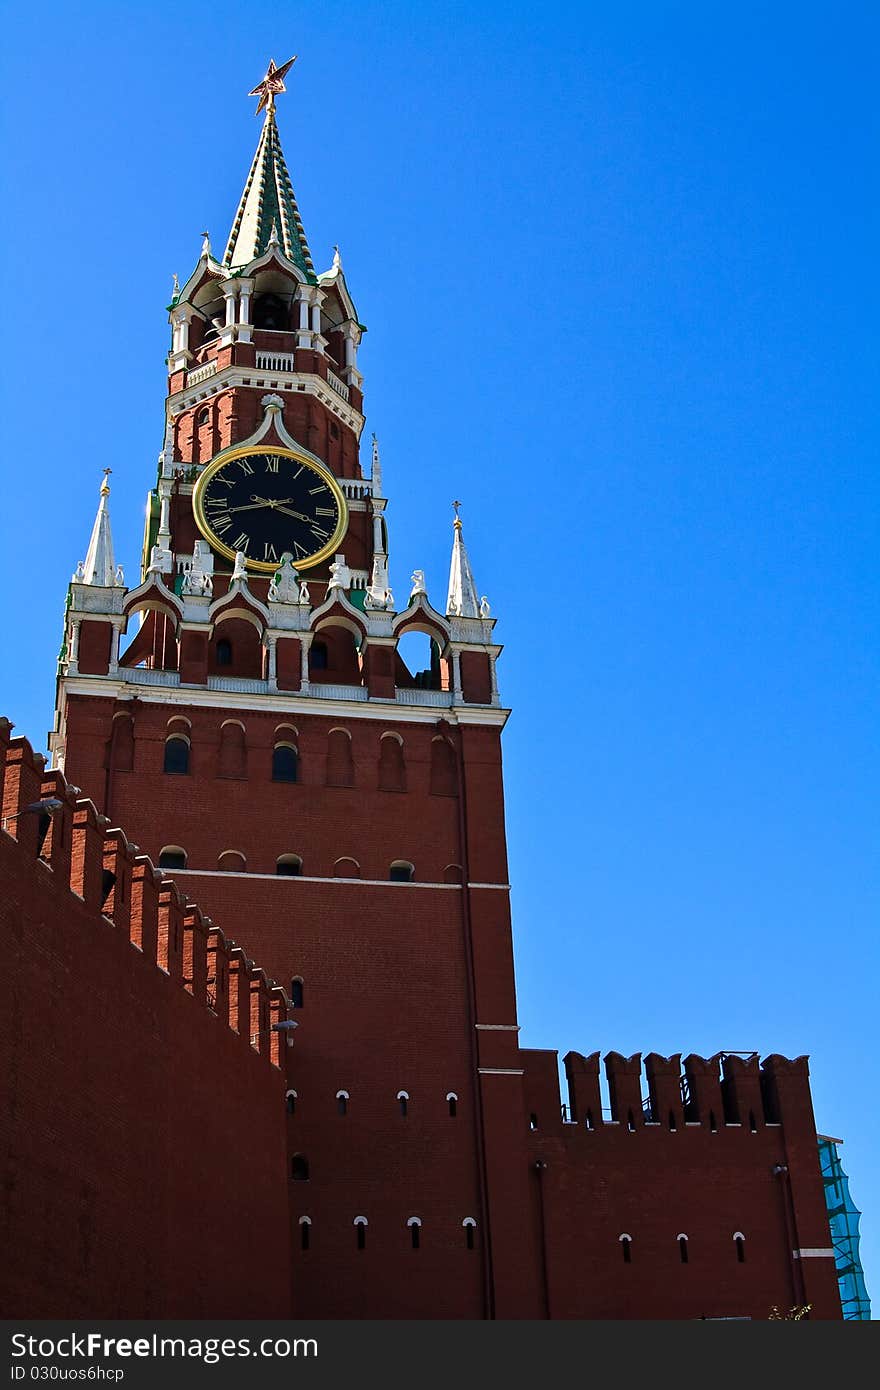 Spasskaya Tower or Savior's Tower, once the main Kremlin's entrance. The gate is no longer open to the public. The tower faces the Red Square and the Saint Basil Cathedral in Moscow.